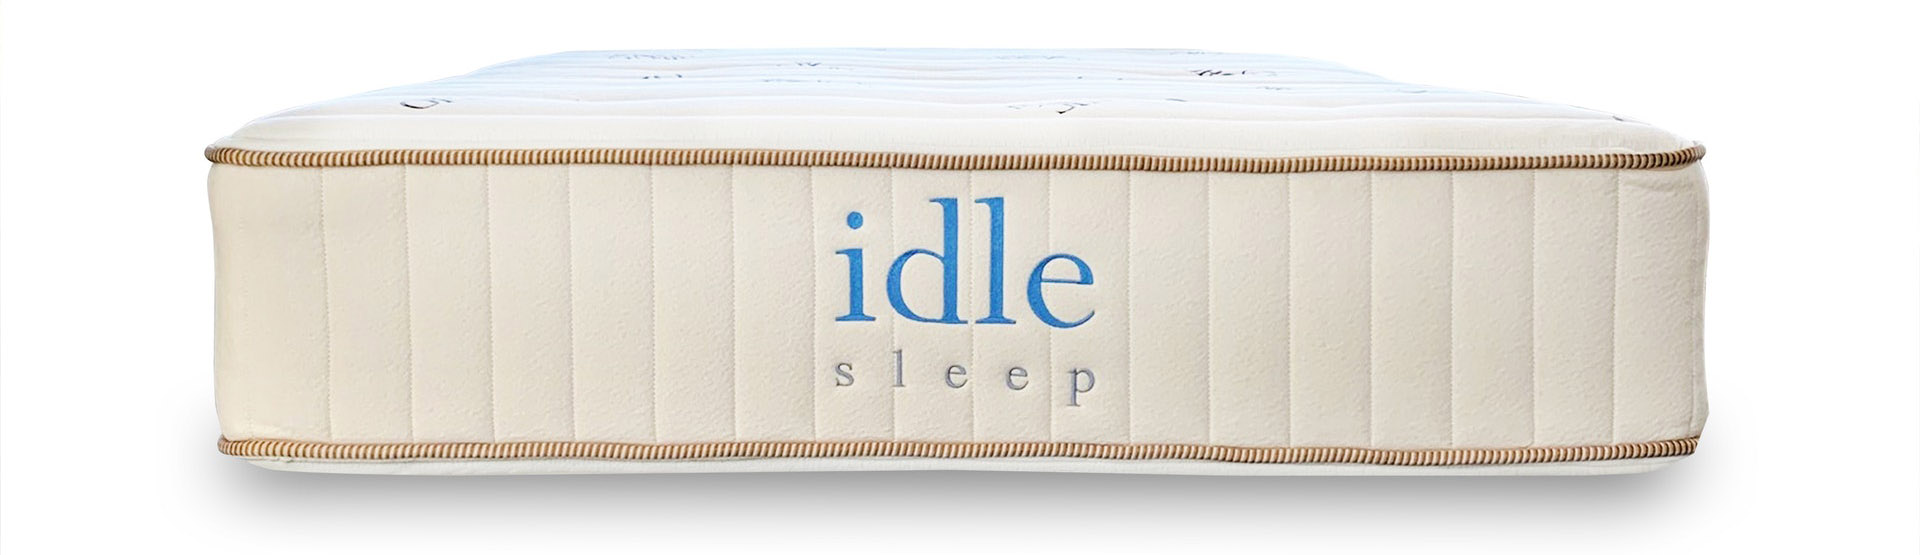 natural dunlop hybrid by idle sleep cropped